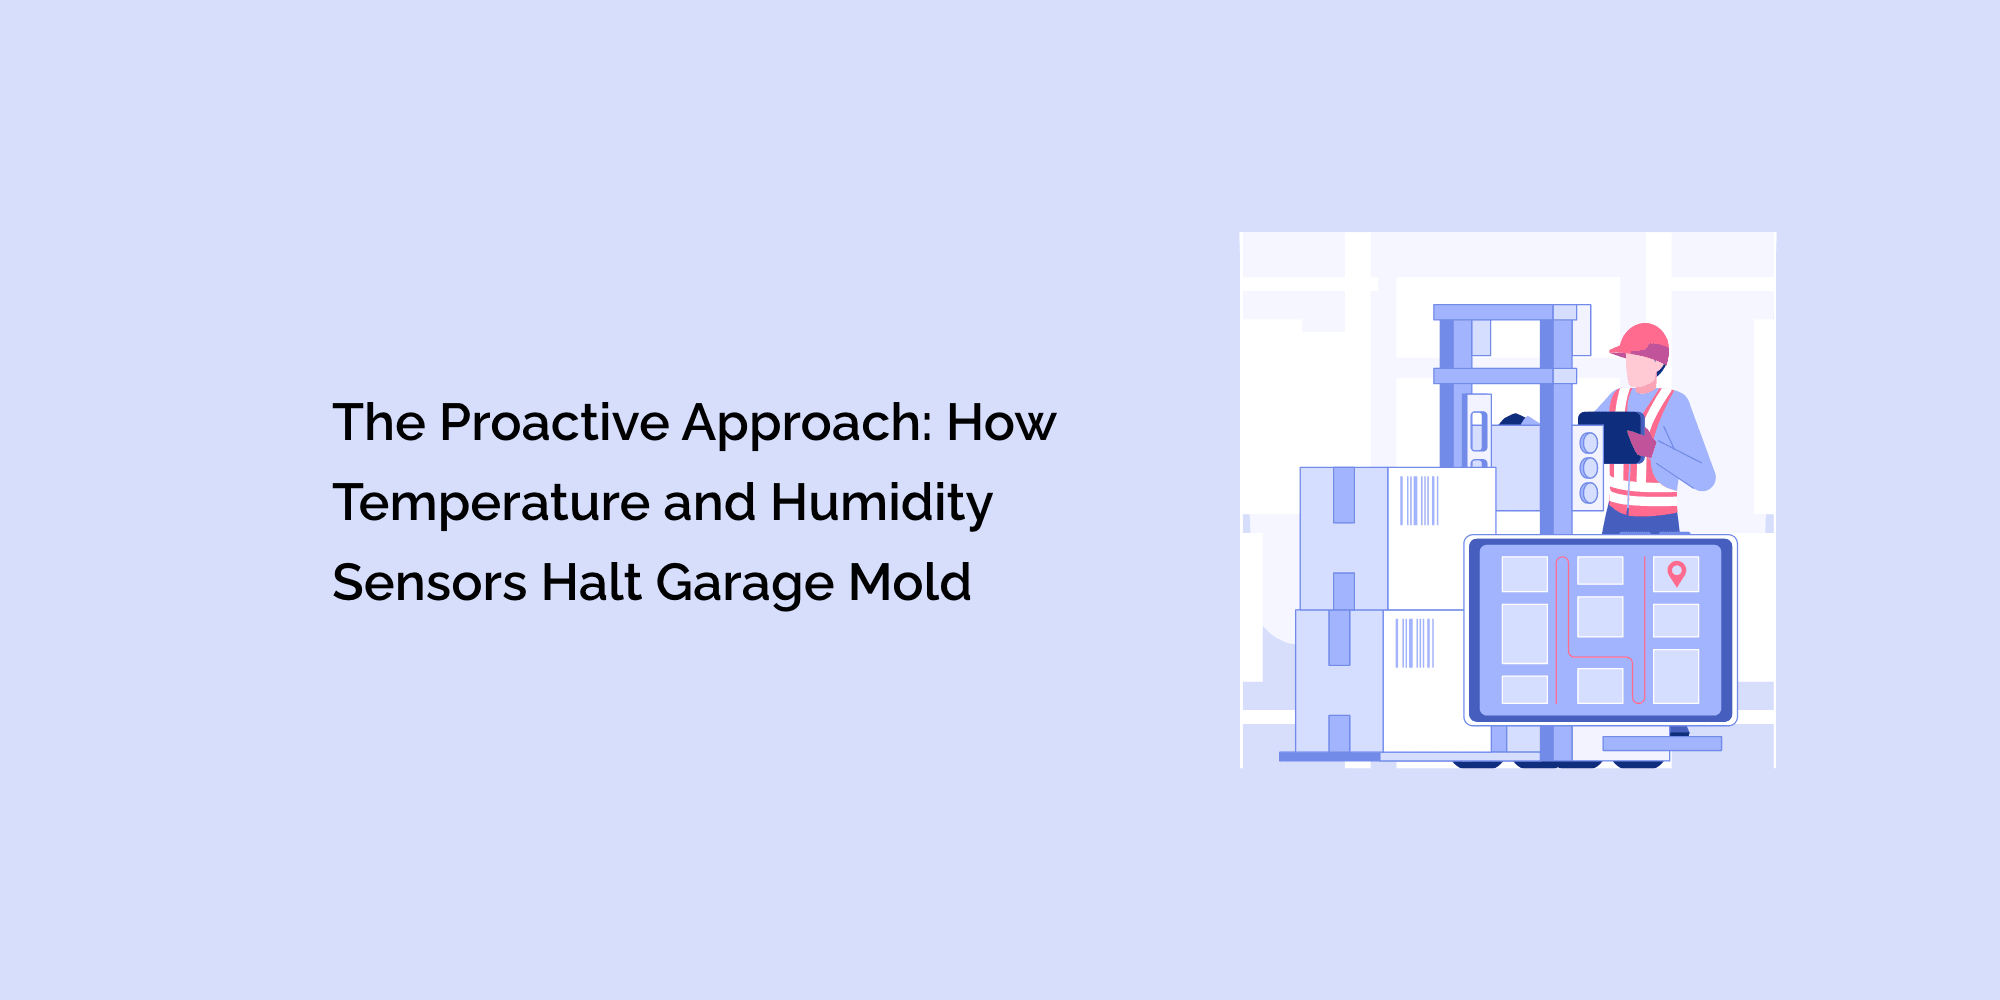 The Proactive Approach: How Temperature and Humidity Sensors Halt Garage Mold